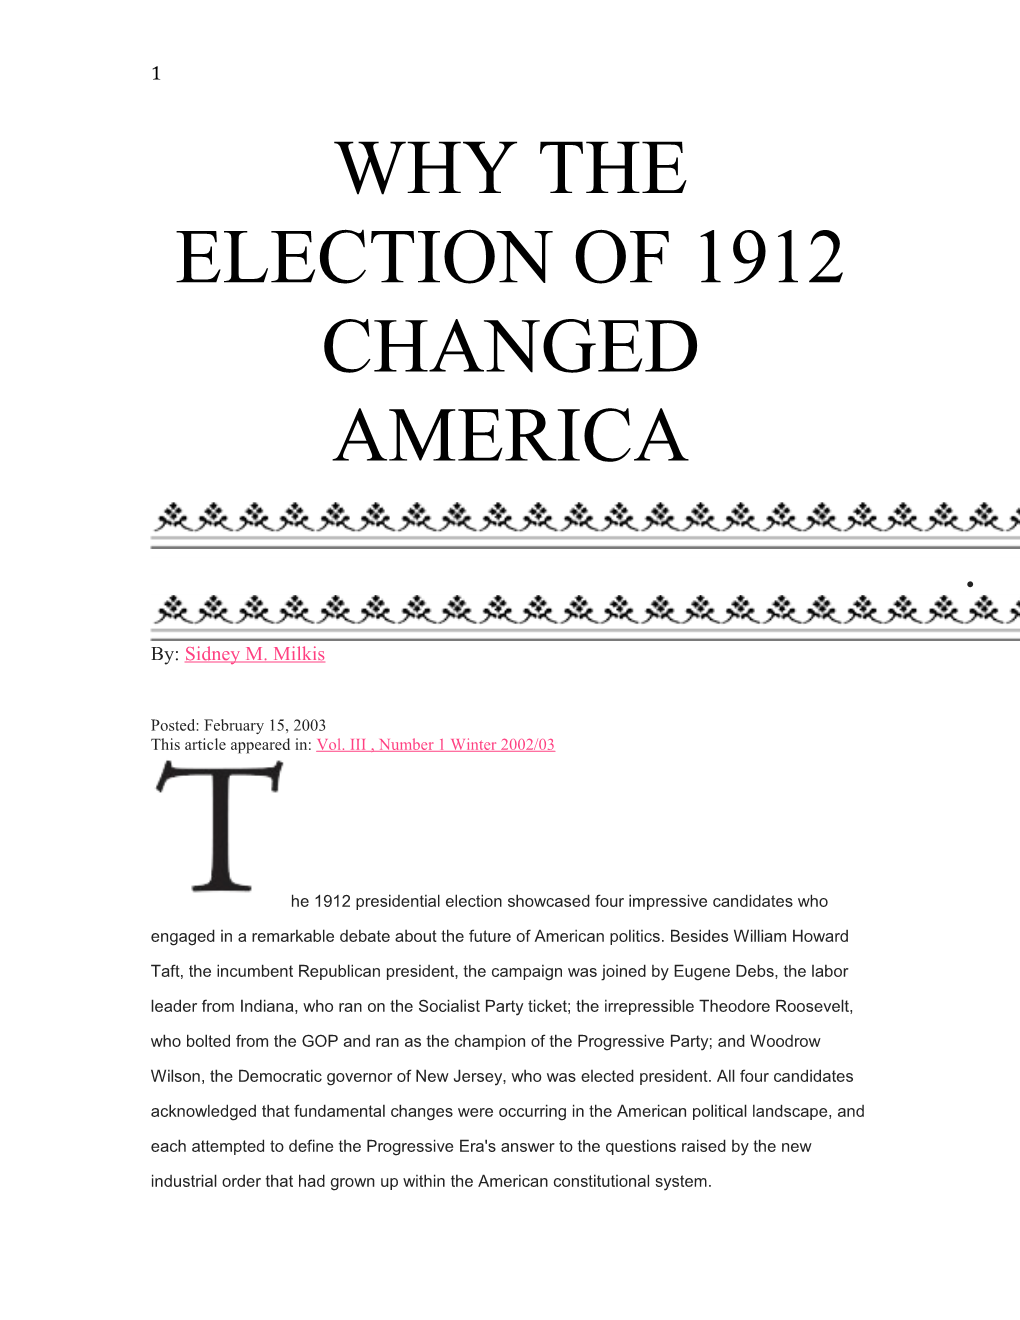 Why the Election of 1912 Changed America